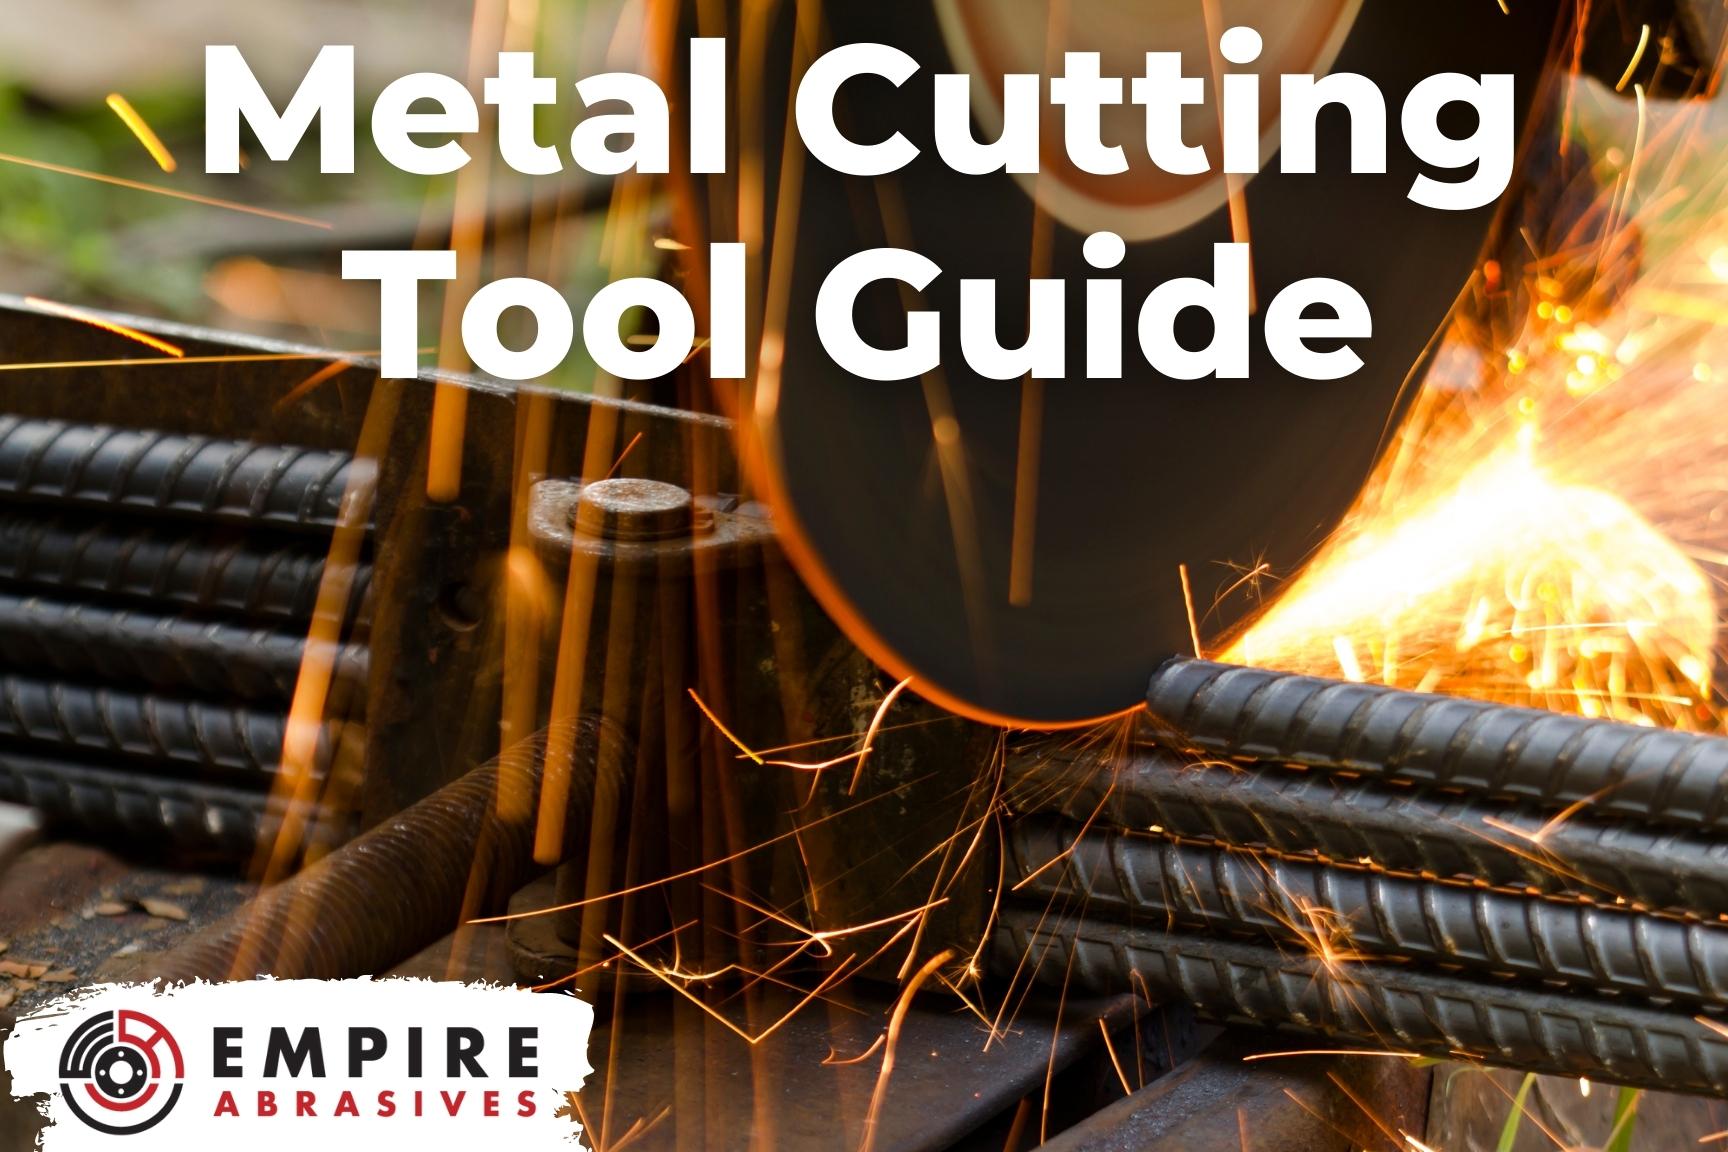 Metal Cutting Tools Guide - Handheld and Power Tools to Cut Metal